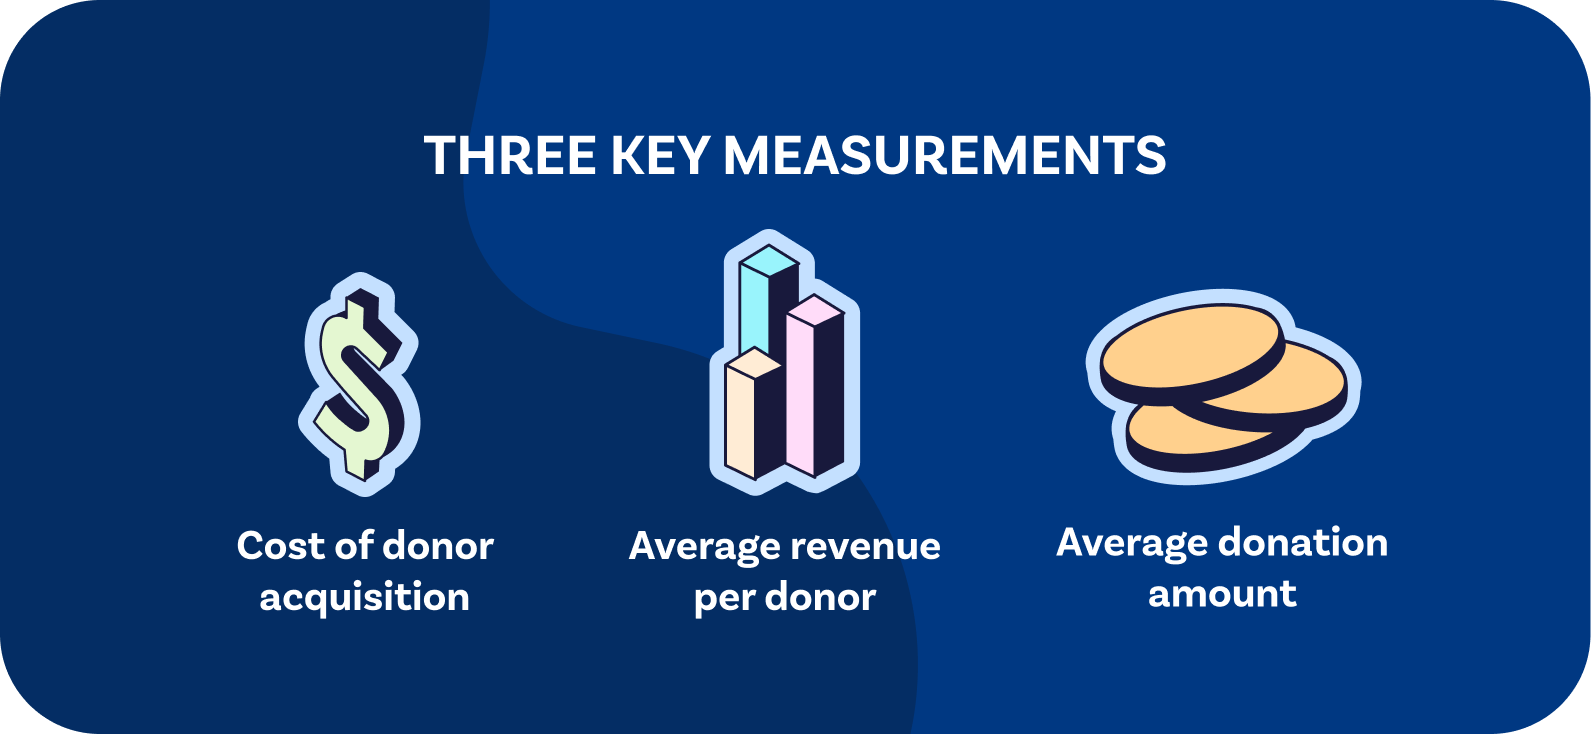 Three key measurements are the cost of donor acquisition, the average revenue per donor, and the average donation amount